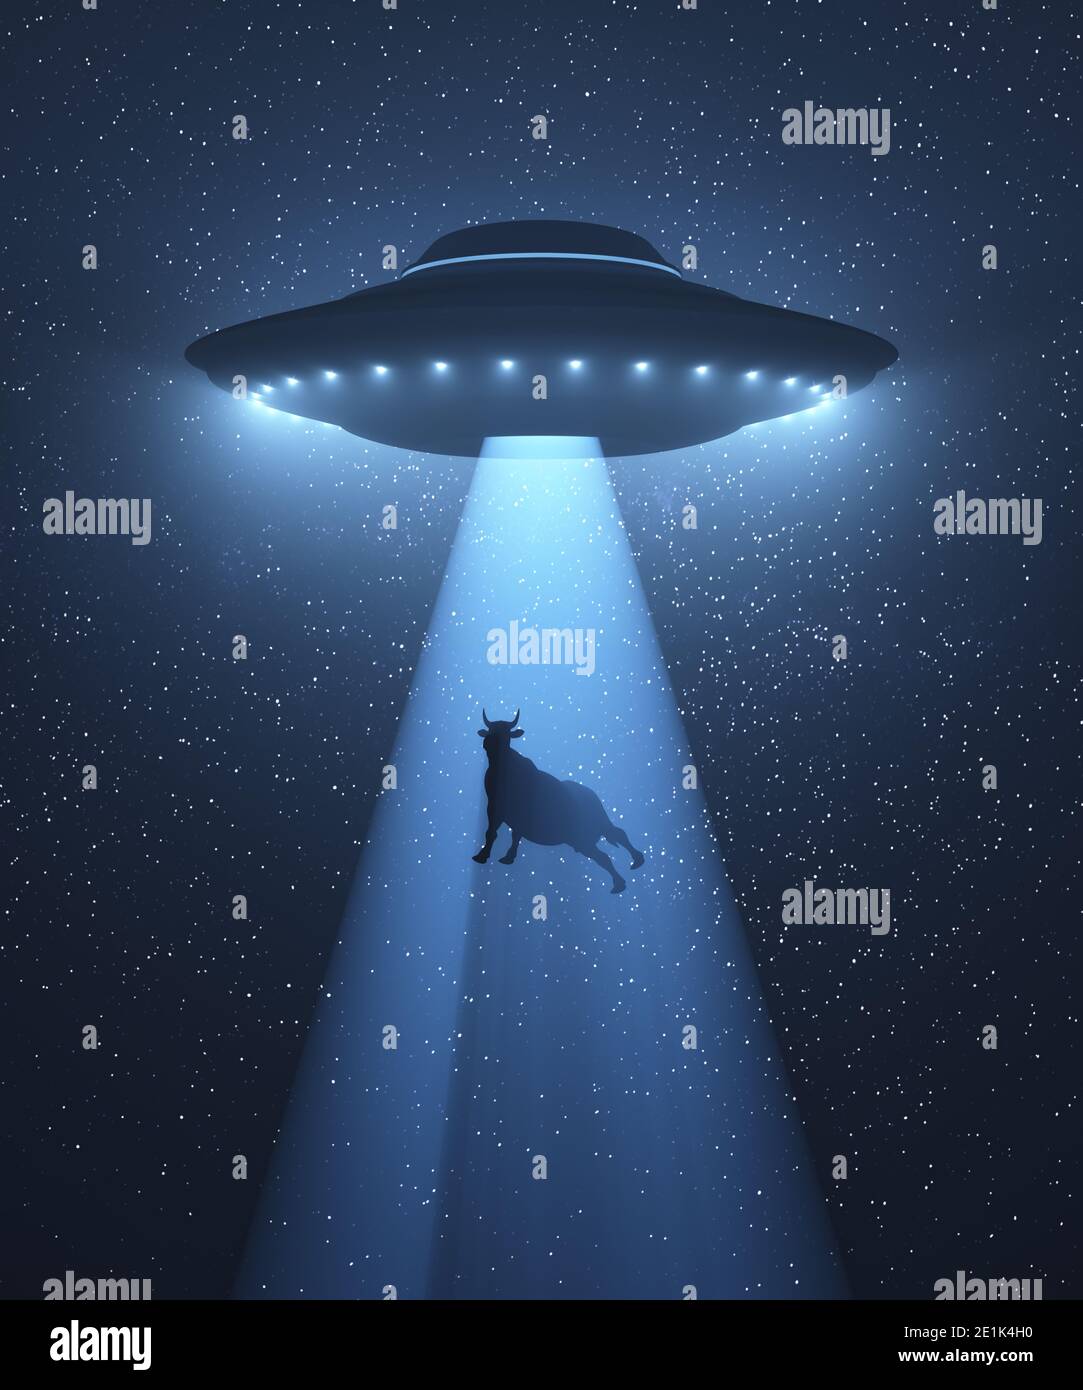 Unidentified flying object flying at night and levitating a cow with the tractor beam. 3D illustration. Stock Photo